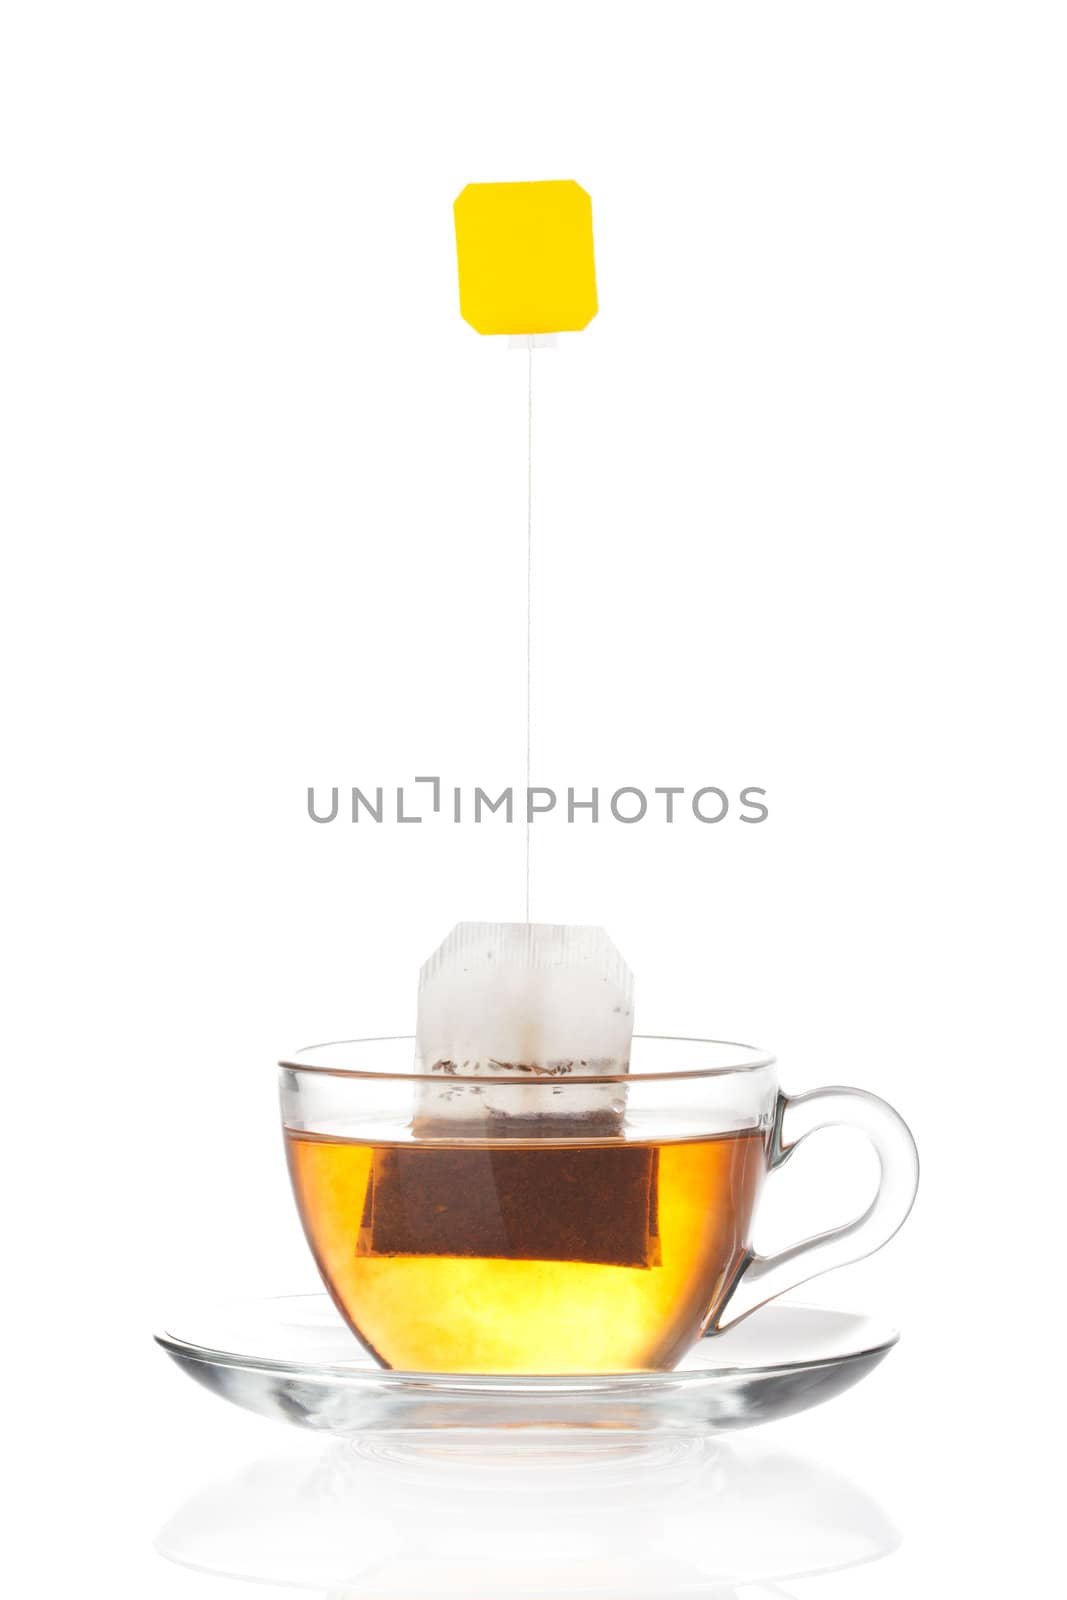 Cup of tea with tea bag (blank label) inside isolated on white background